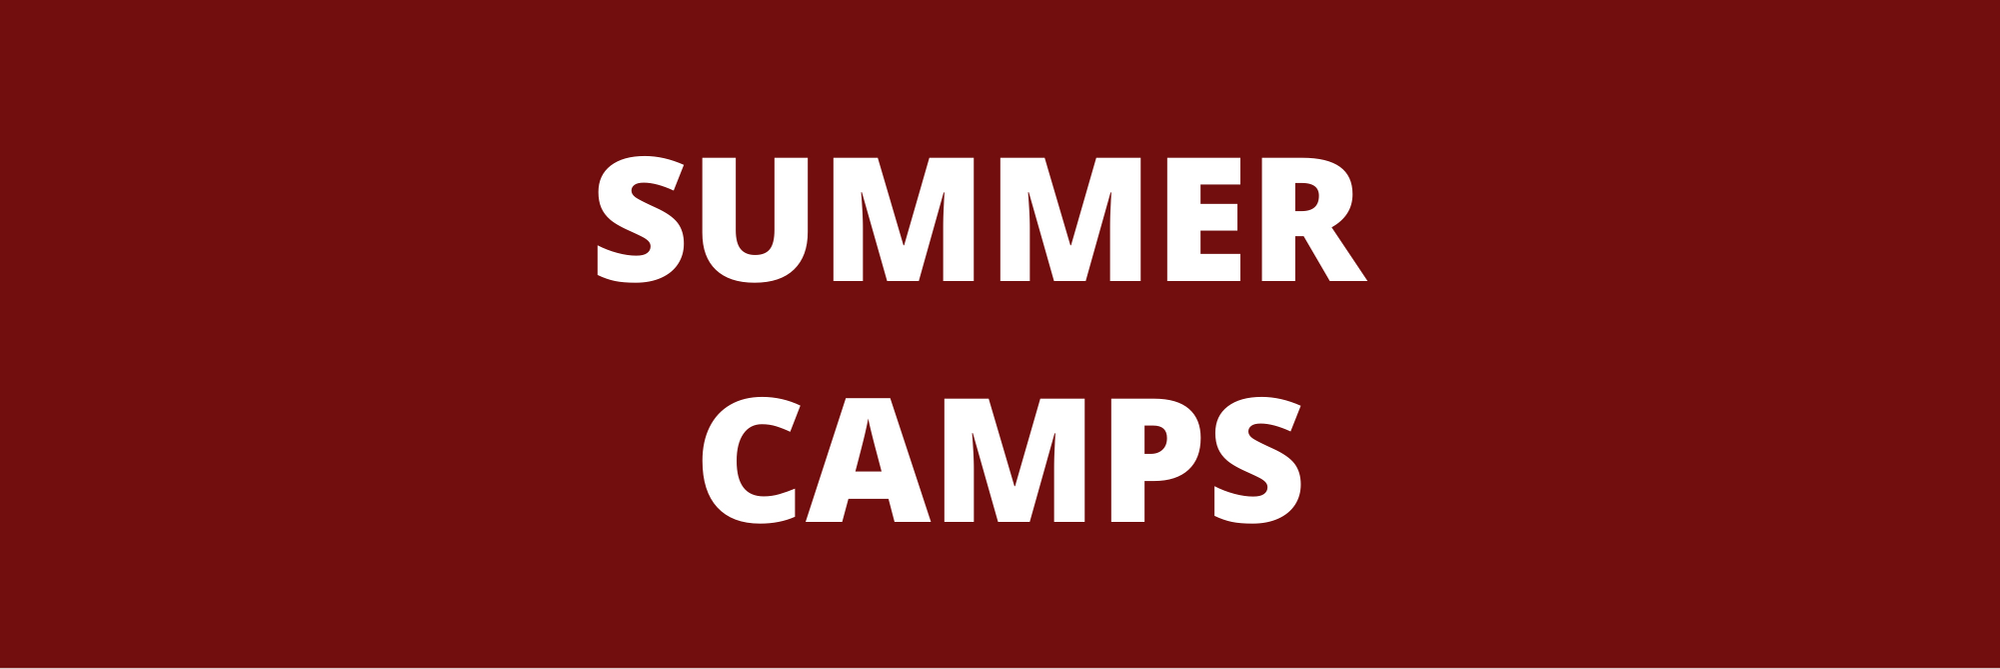 Summer camps img